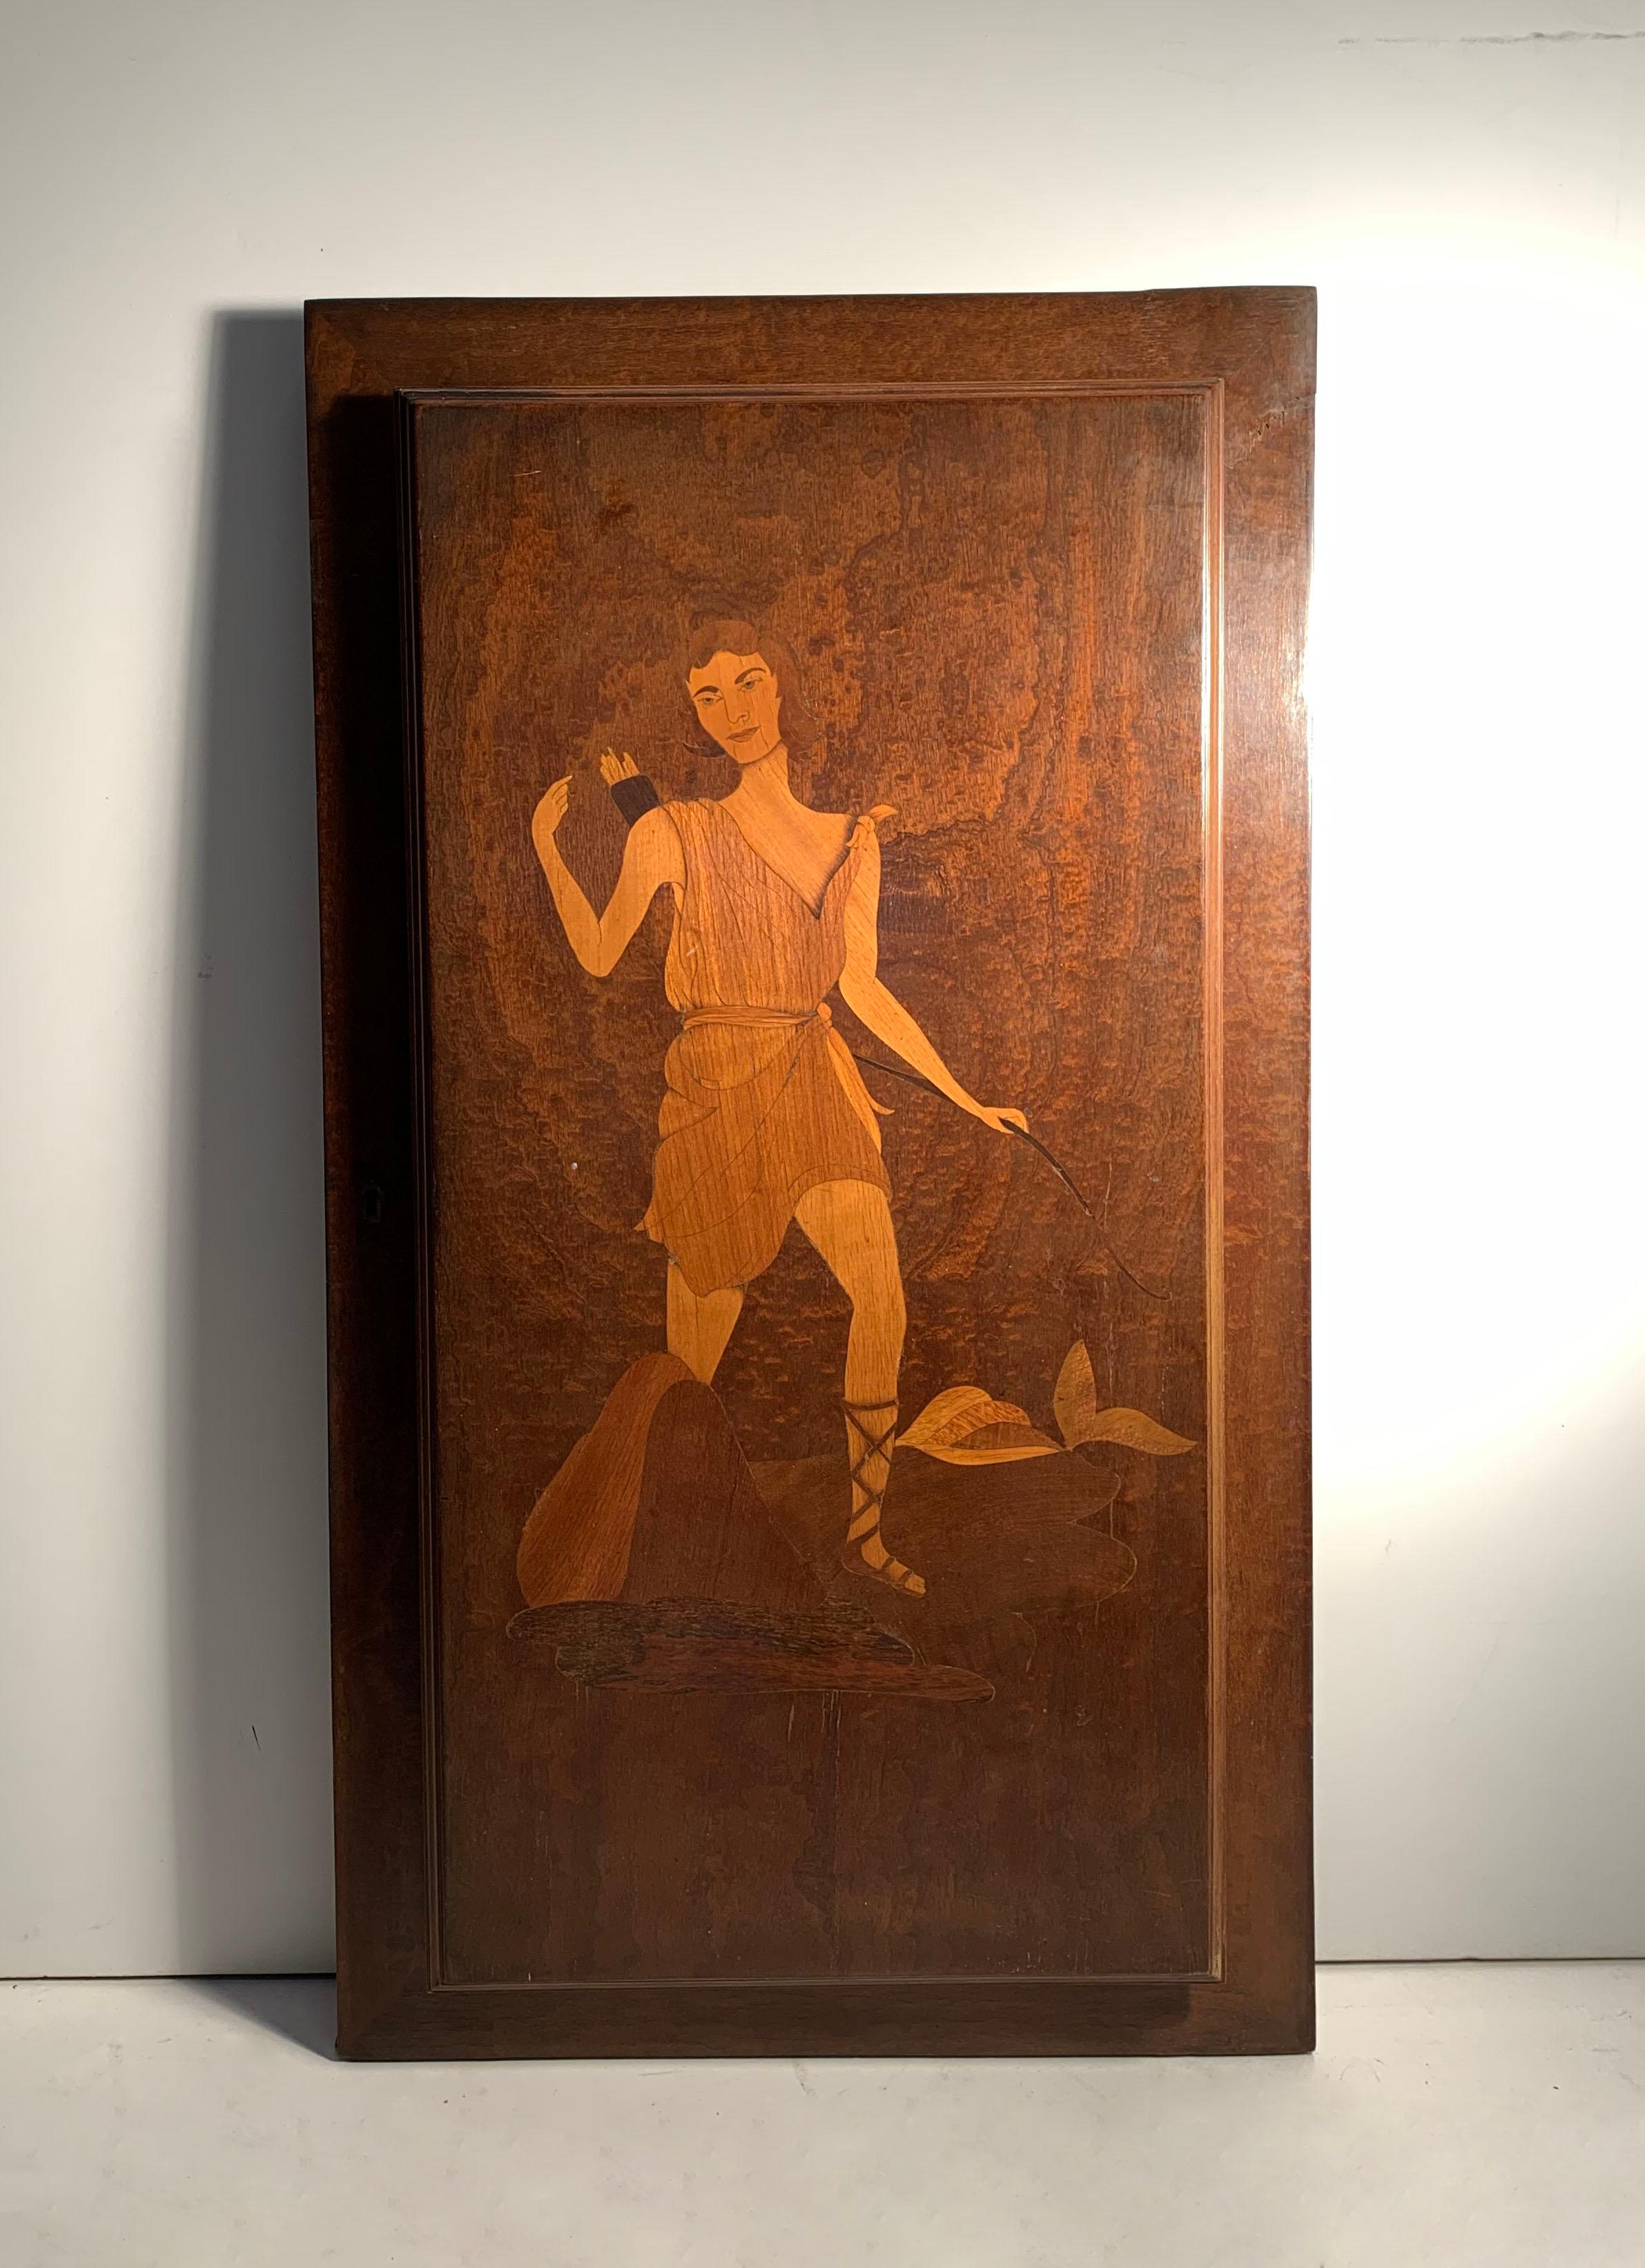 Large Eugenio Diez illuminated marquetry wood panels. These were from a very large cabinet. The doors could be repurposed for another cabinet.

Style of Aldo Tura 